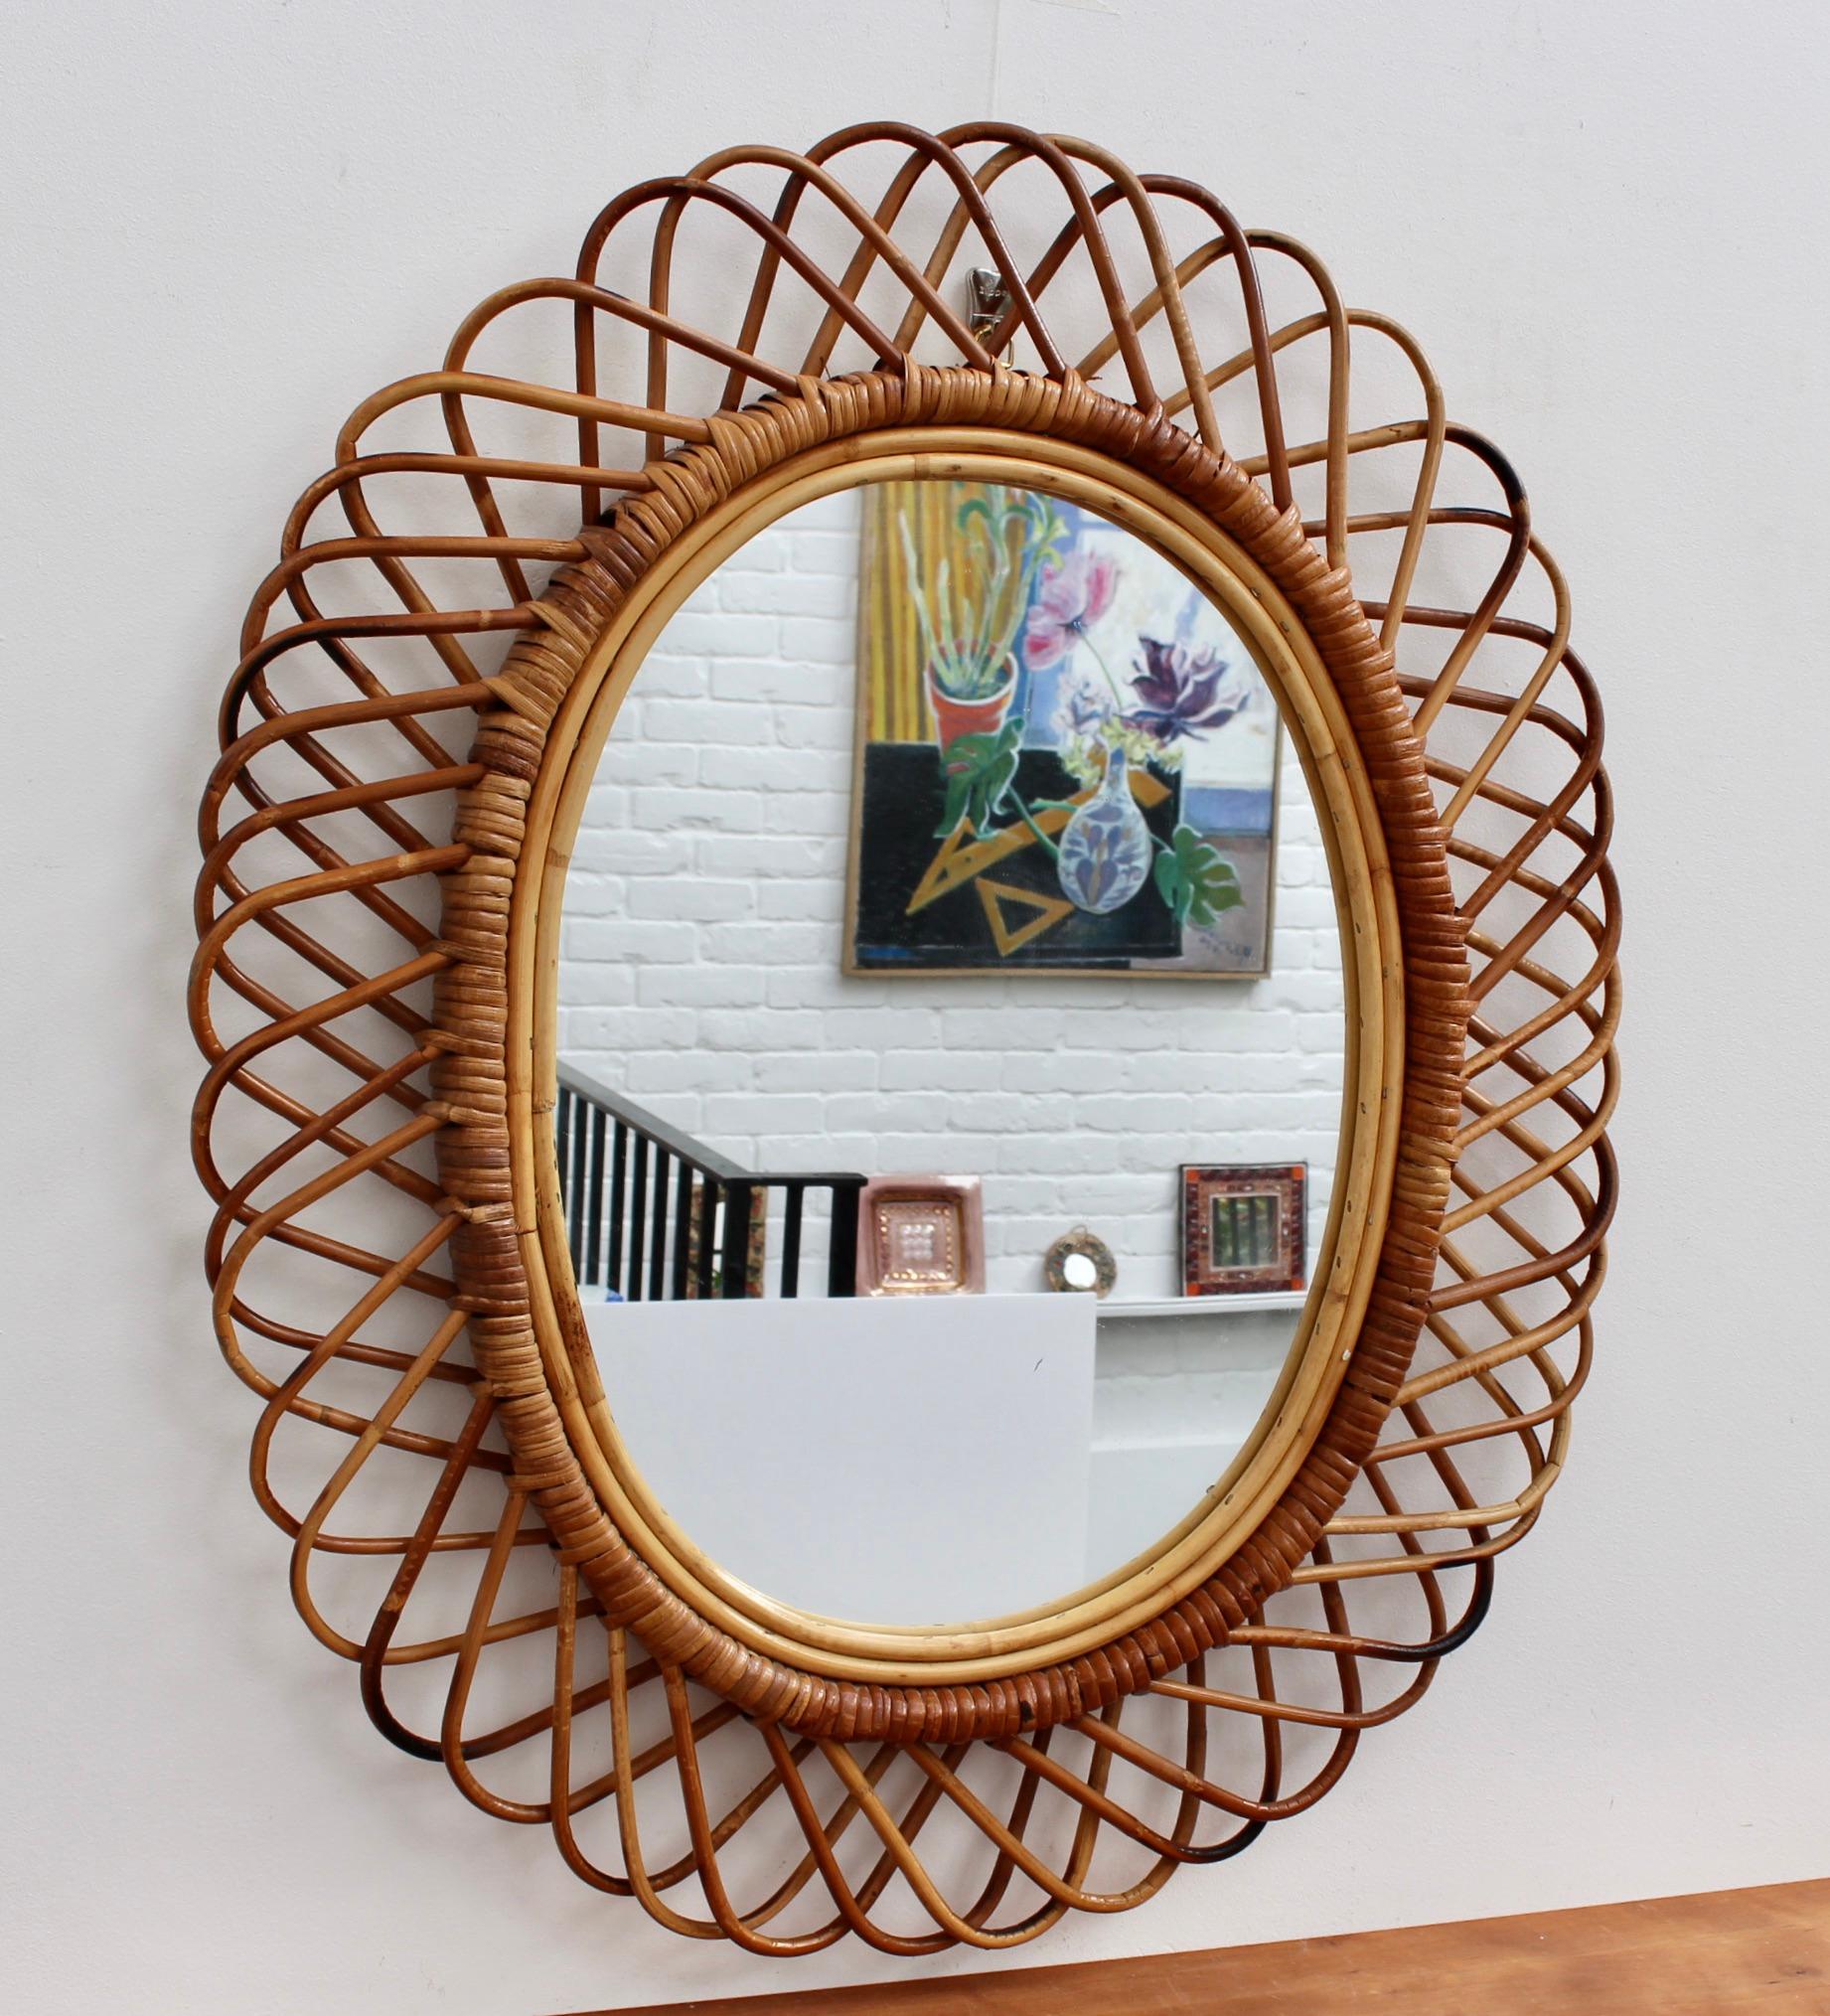 Italian rattan wall mirror, (circa 1960s). This piece has a complex weave of rattan in a continual series of horseshoe-shaped projections on the frame edge. There is a graceful, characterful patina on the frame rattan and cane commensurate with age.